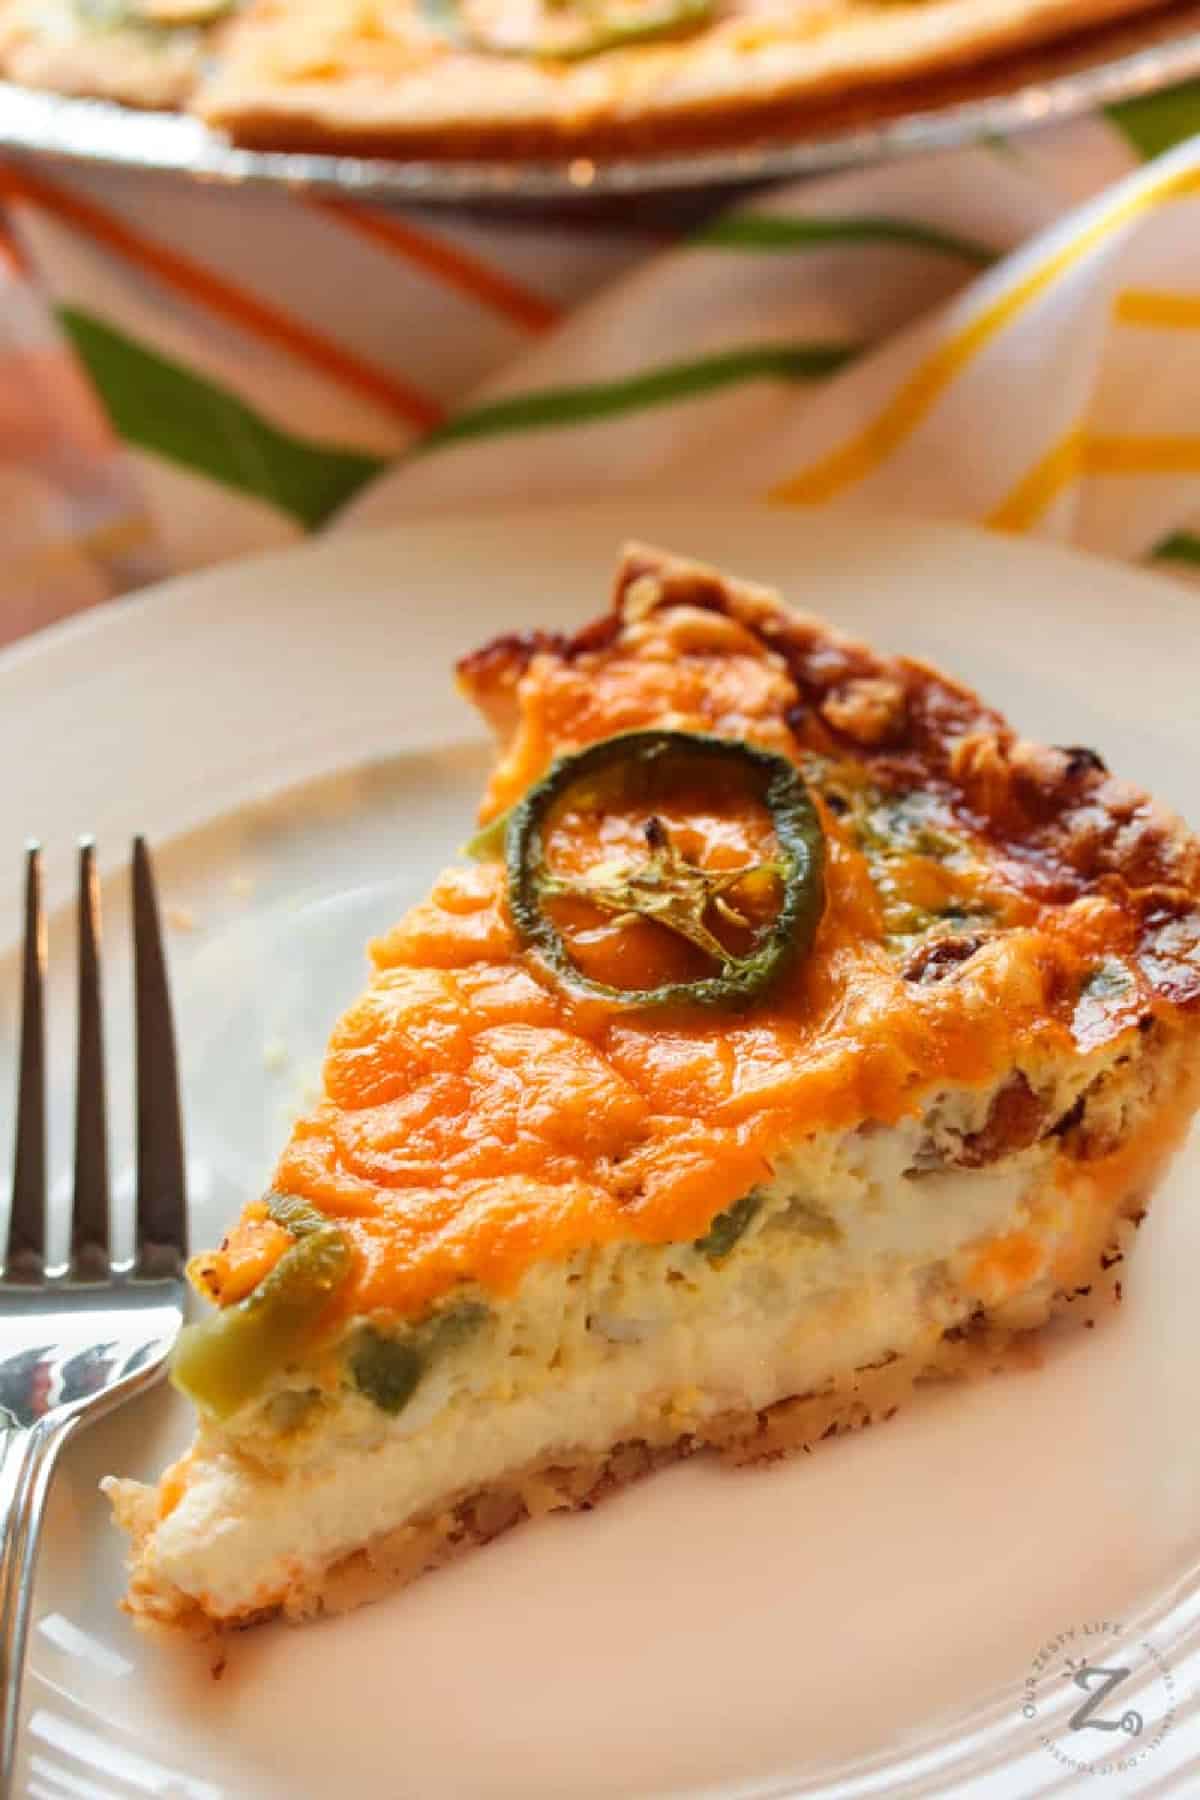 zesty bacon and cheese quiche, with a sliced jalapeno on top, served on a white plate with a fork on the side.